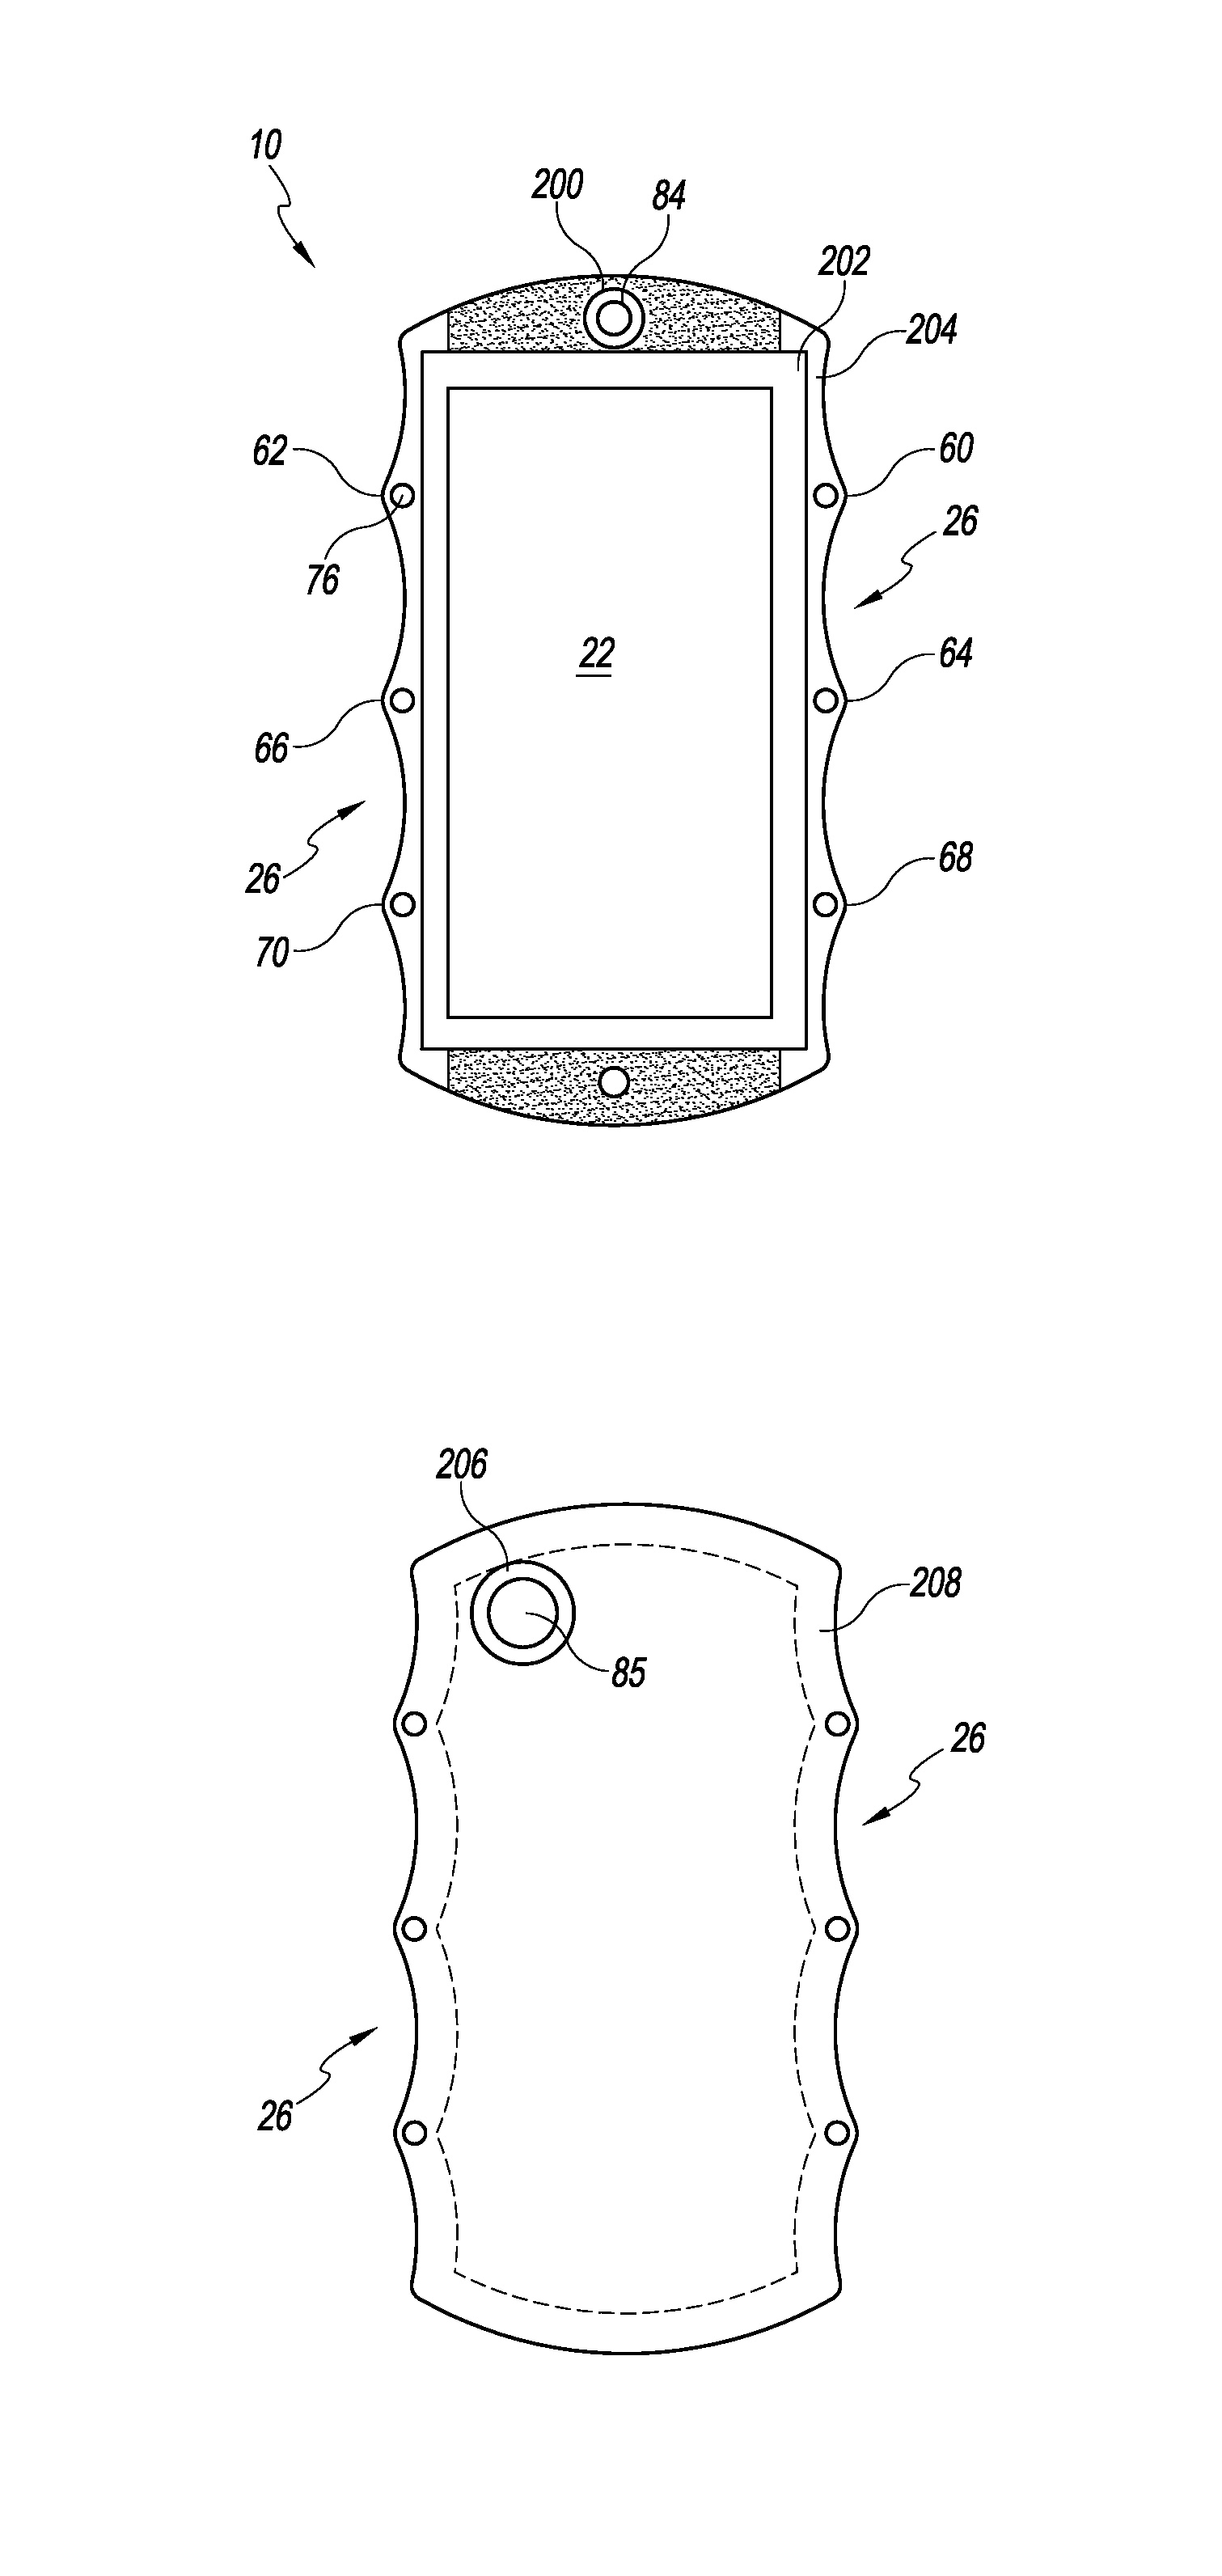 Cellphone with contoured surfaces